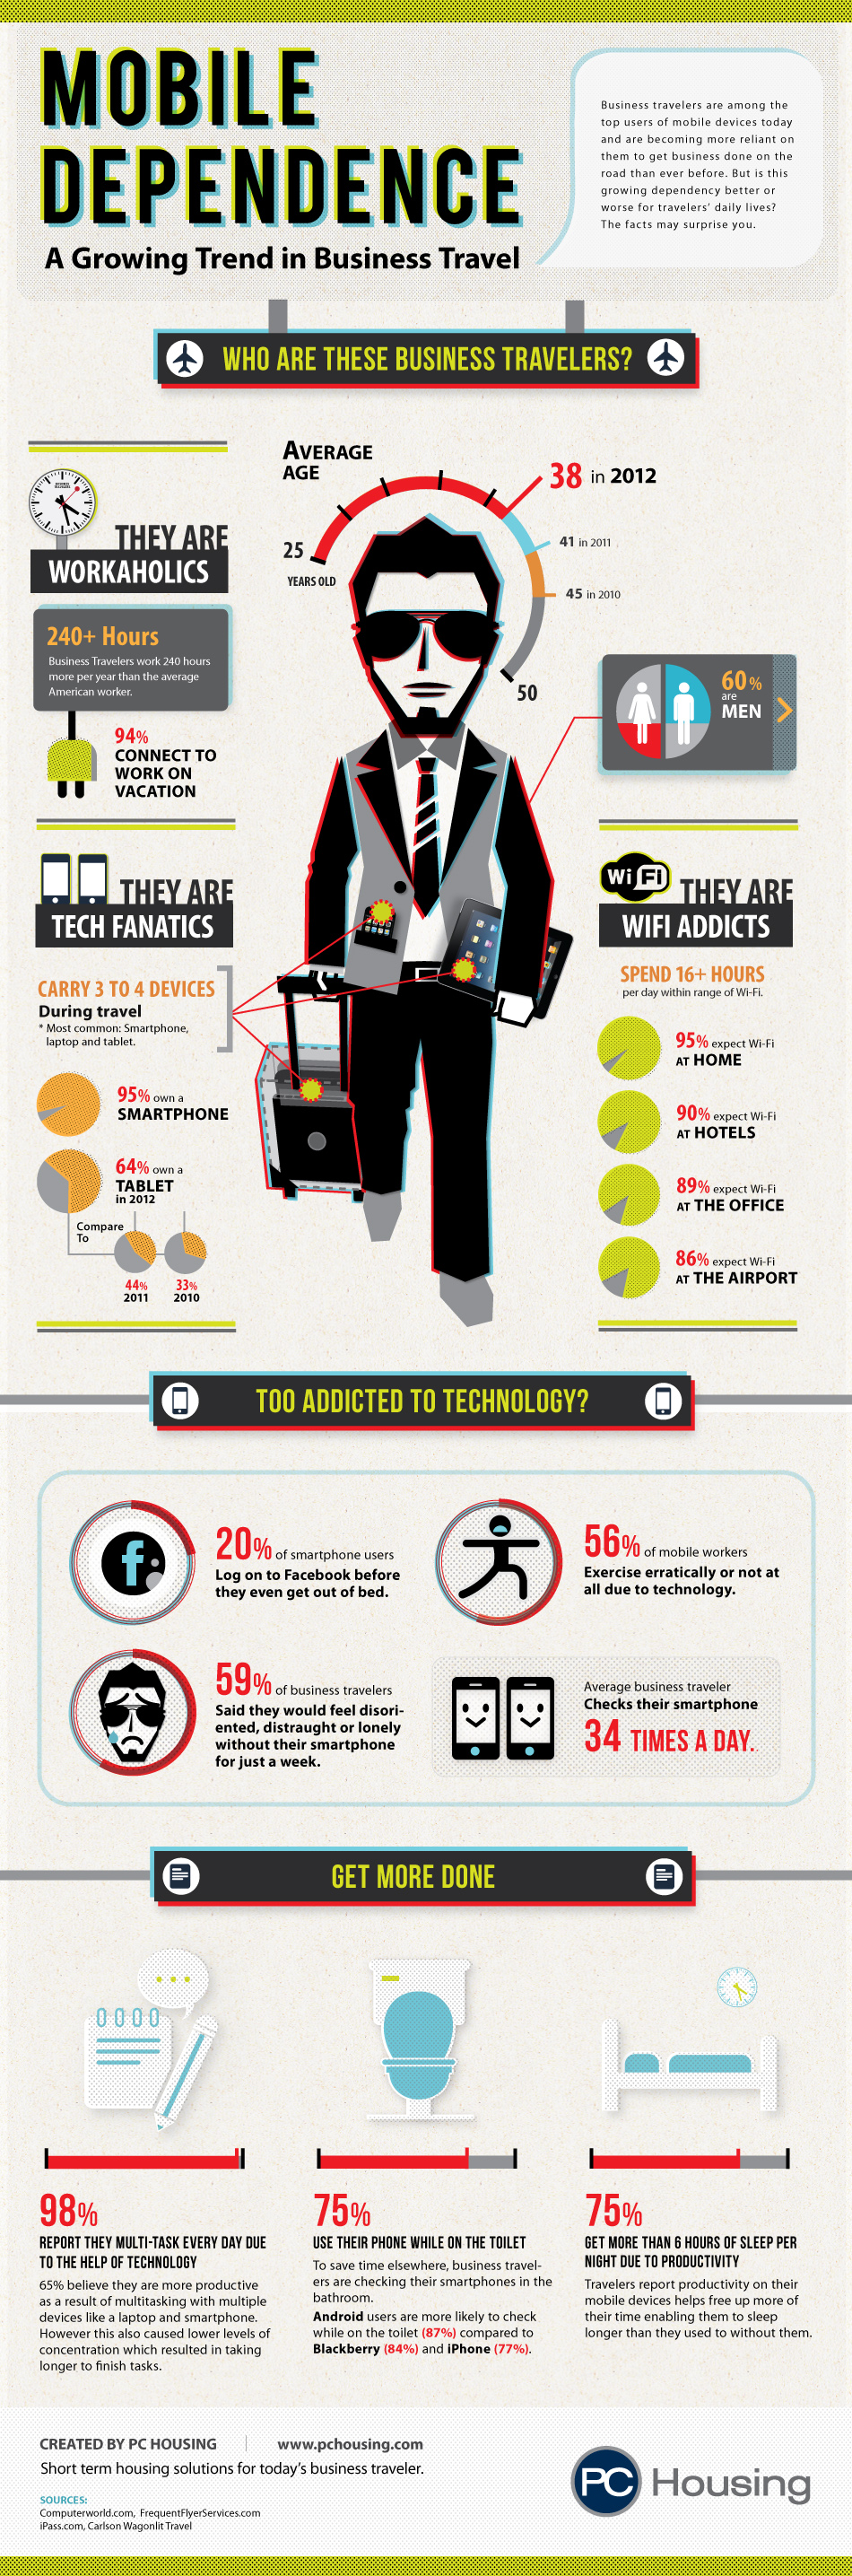 Business Traveler's Mobile Dependence Infographic, created by PC Housing